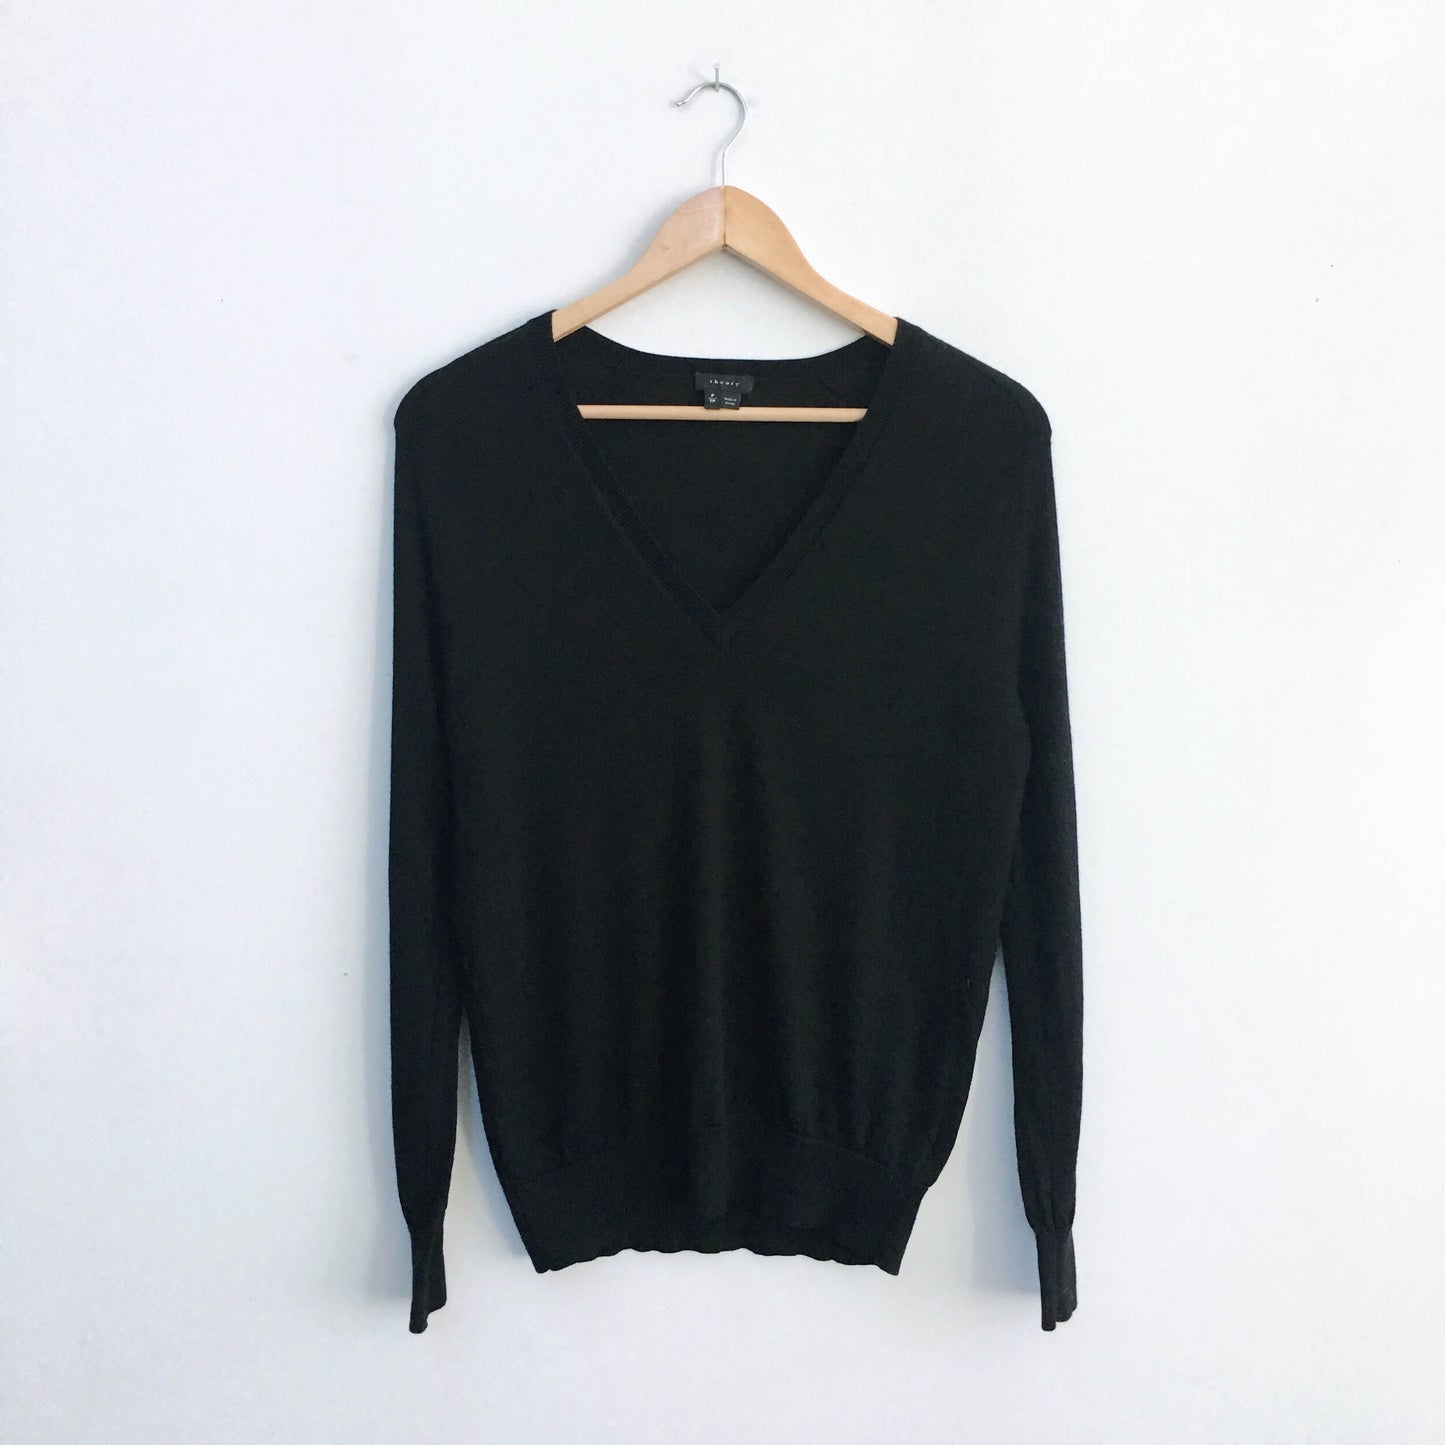 Theory V-neck Sweater - size Small